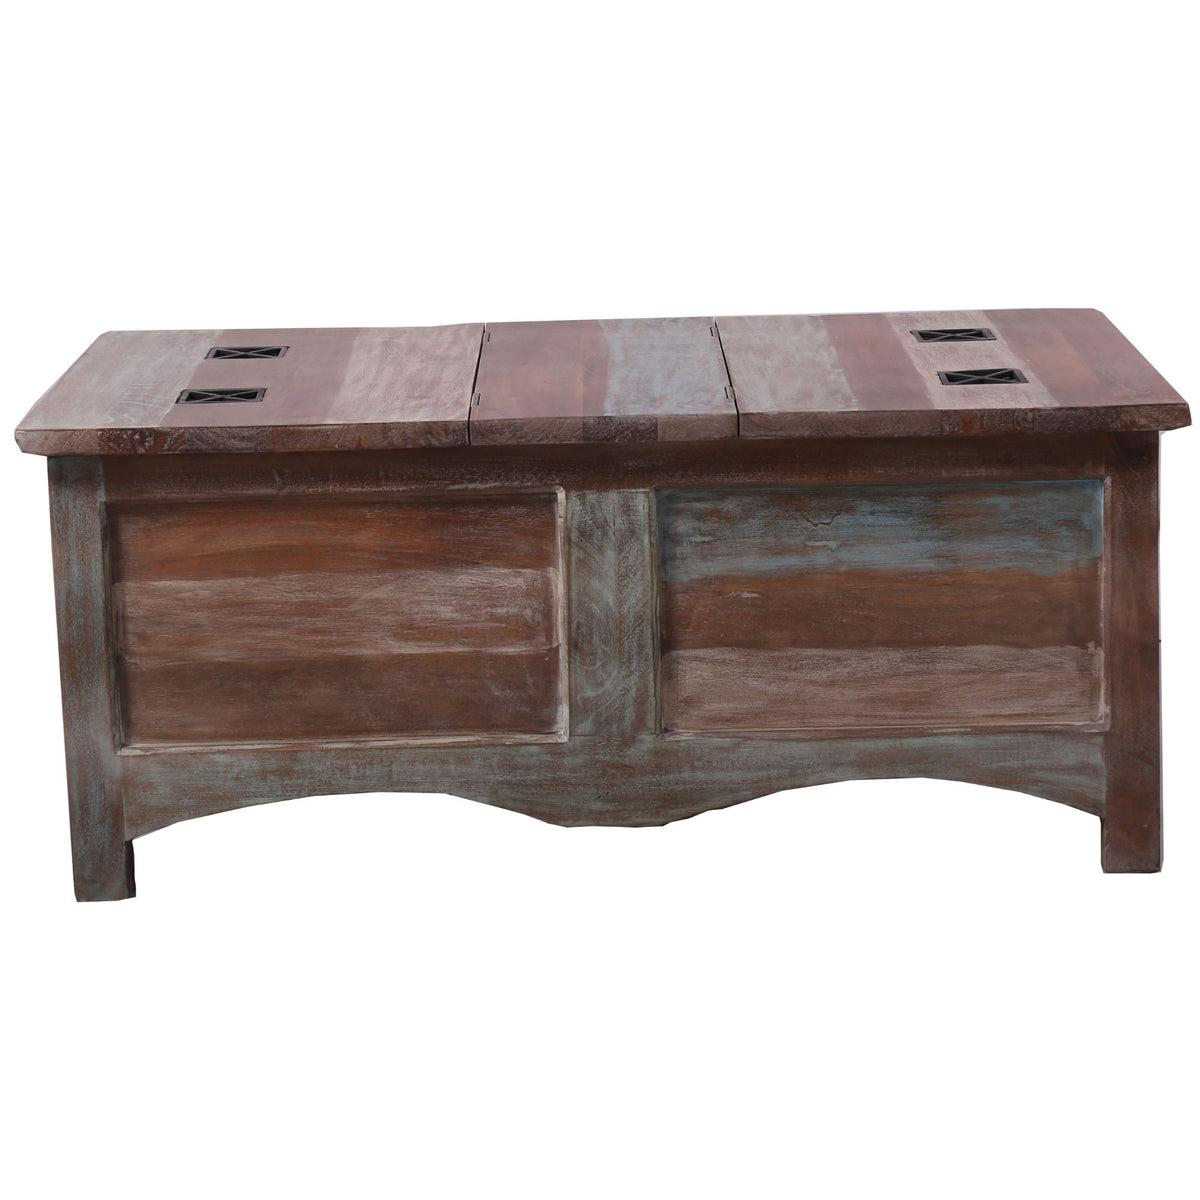 Gulmohar Antique Coffee Table with Handcrafted Mango Wood Trunk Chest Box - Notbrand